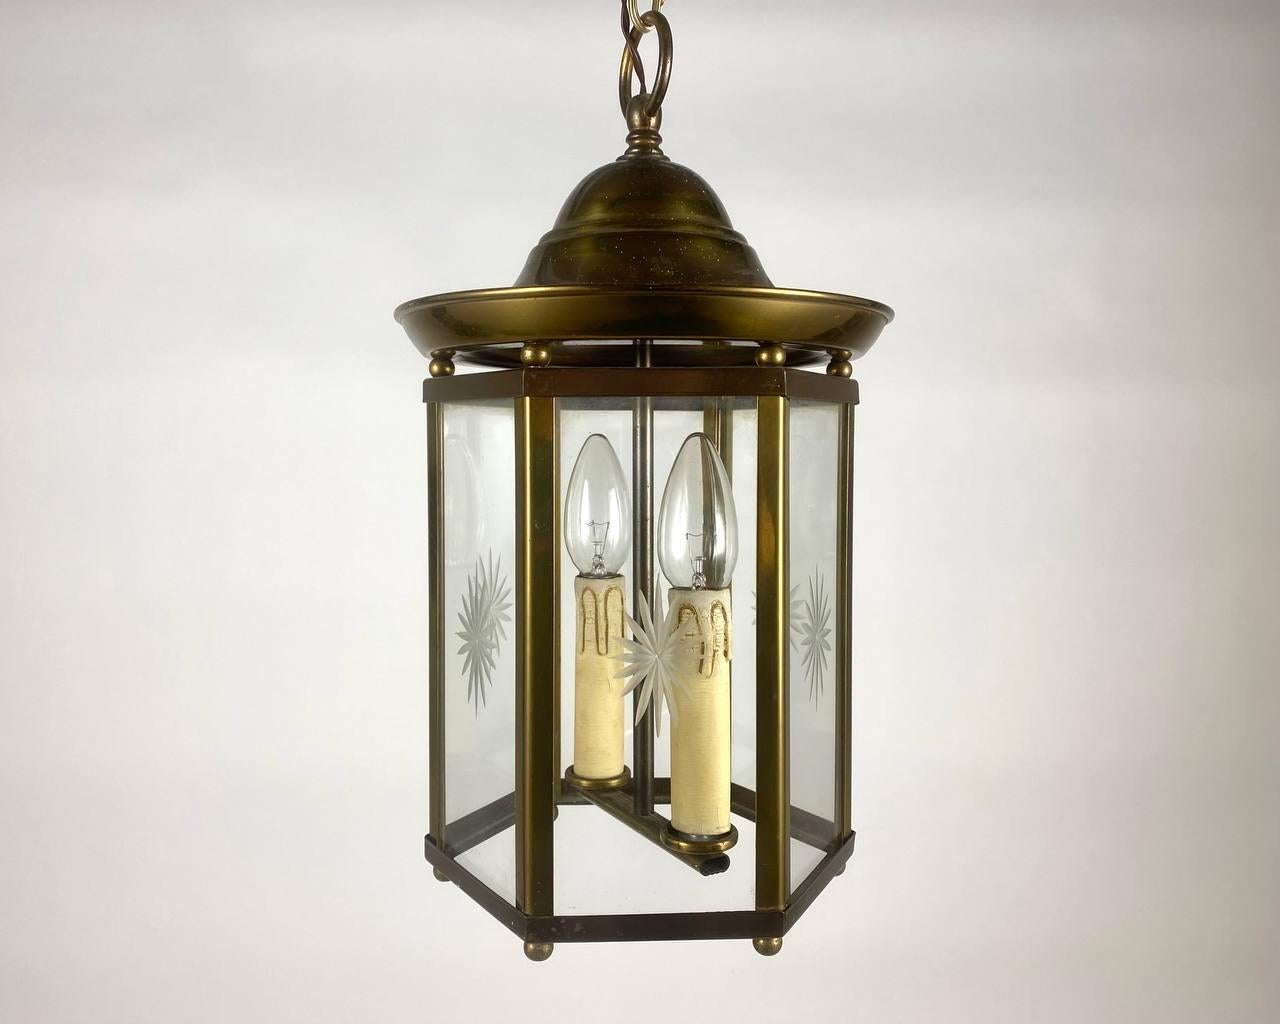 Brass Art Nouveau Lantern with Glass Panels Vintage Lighting In Excellent Condition For Sale In Bastogne, BE